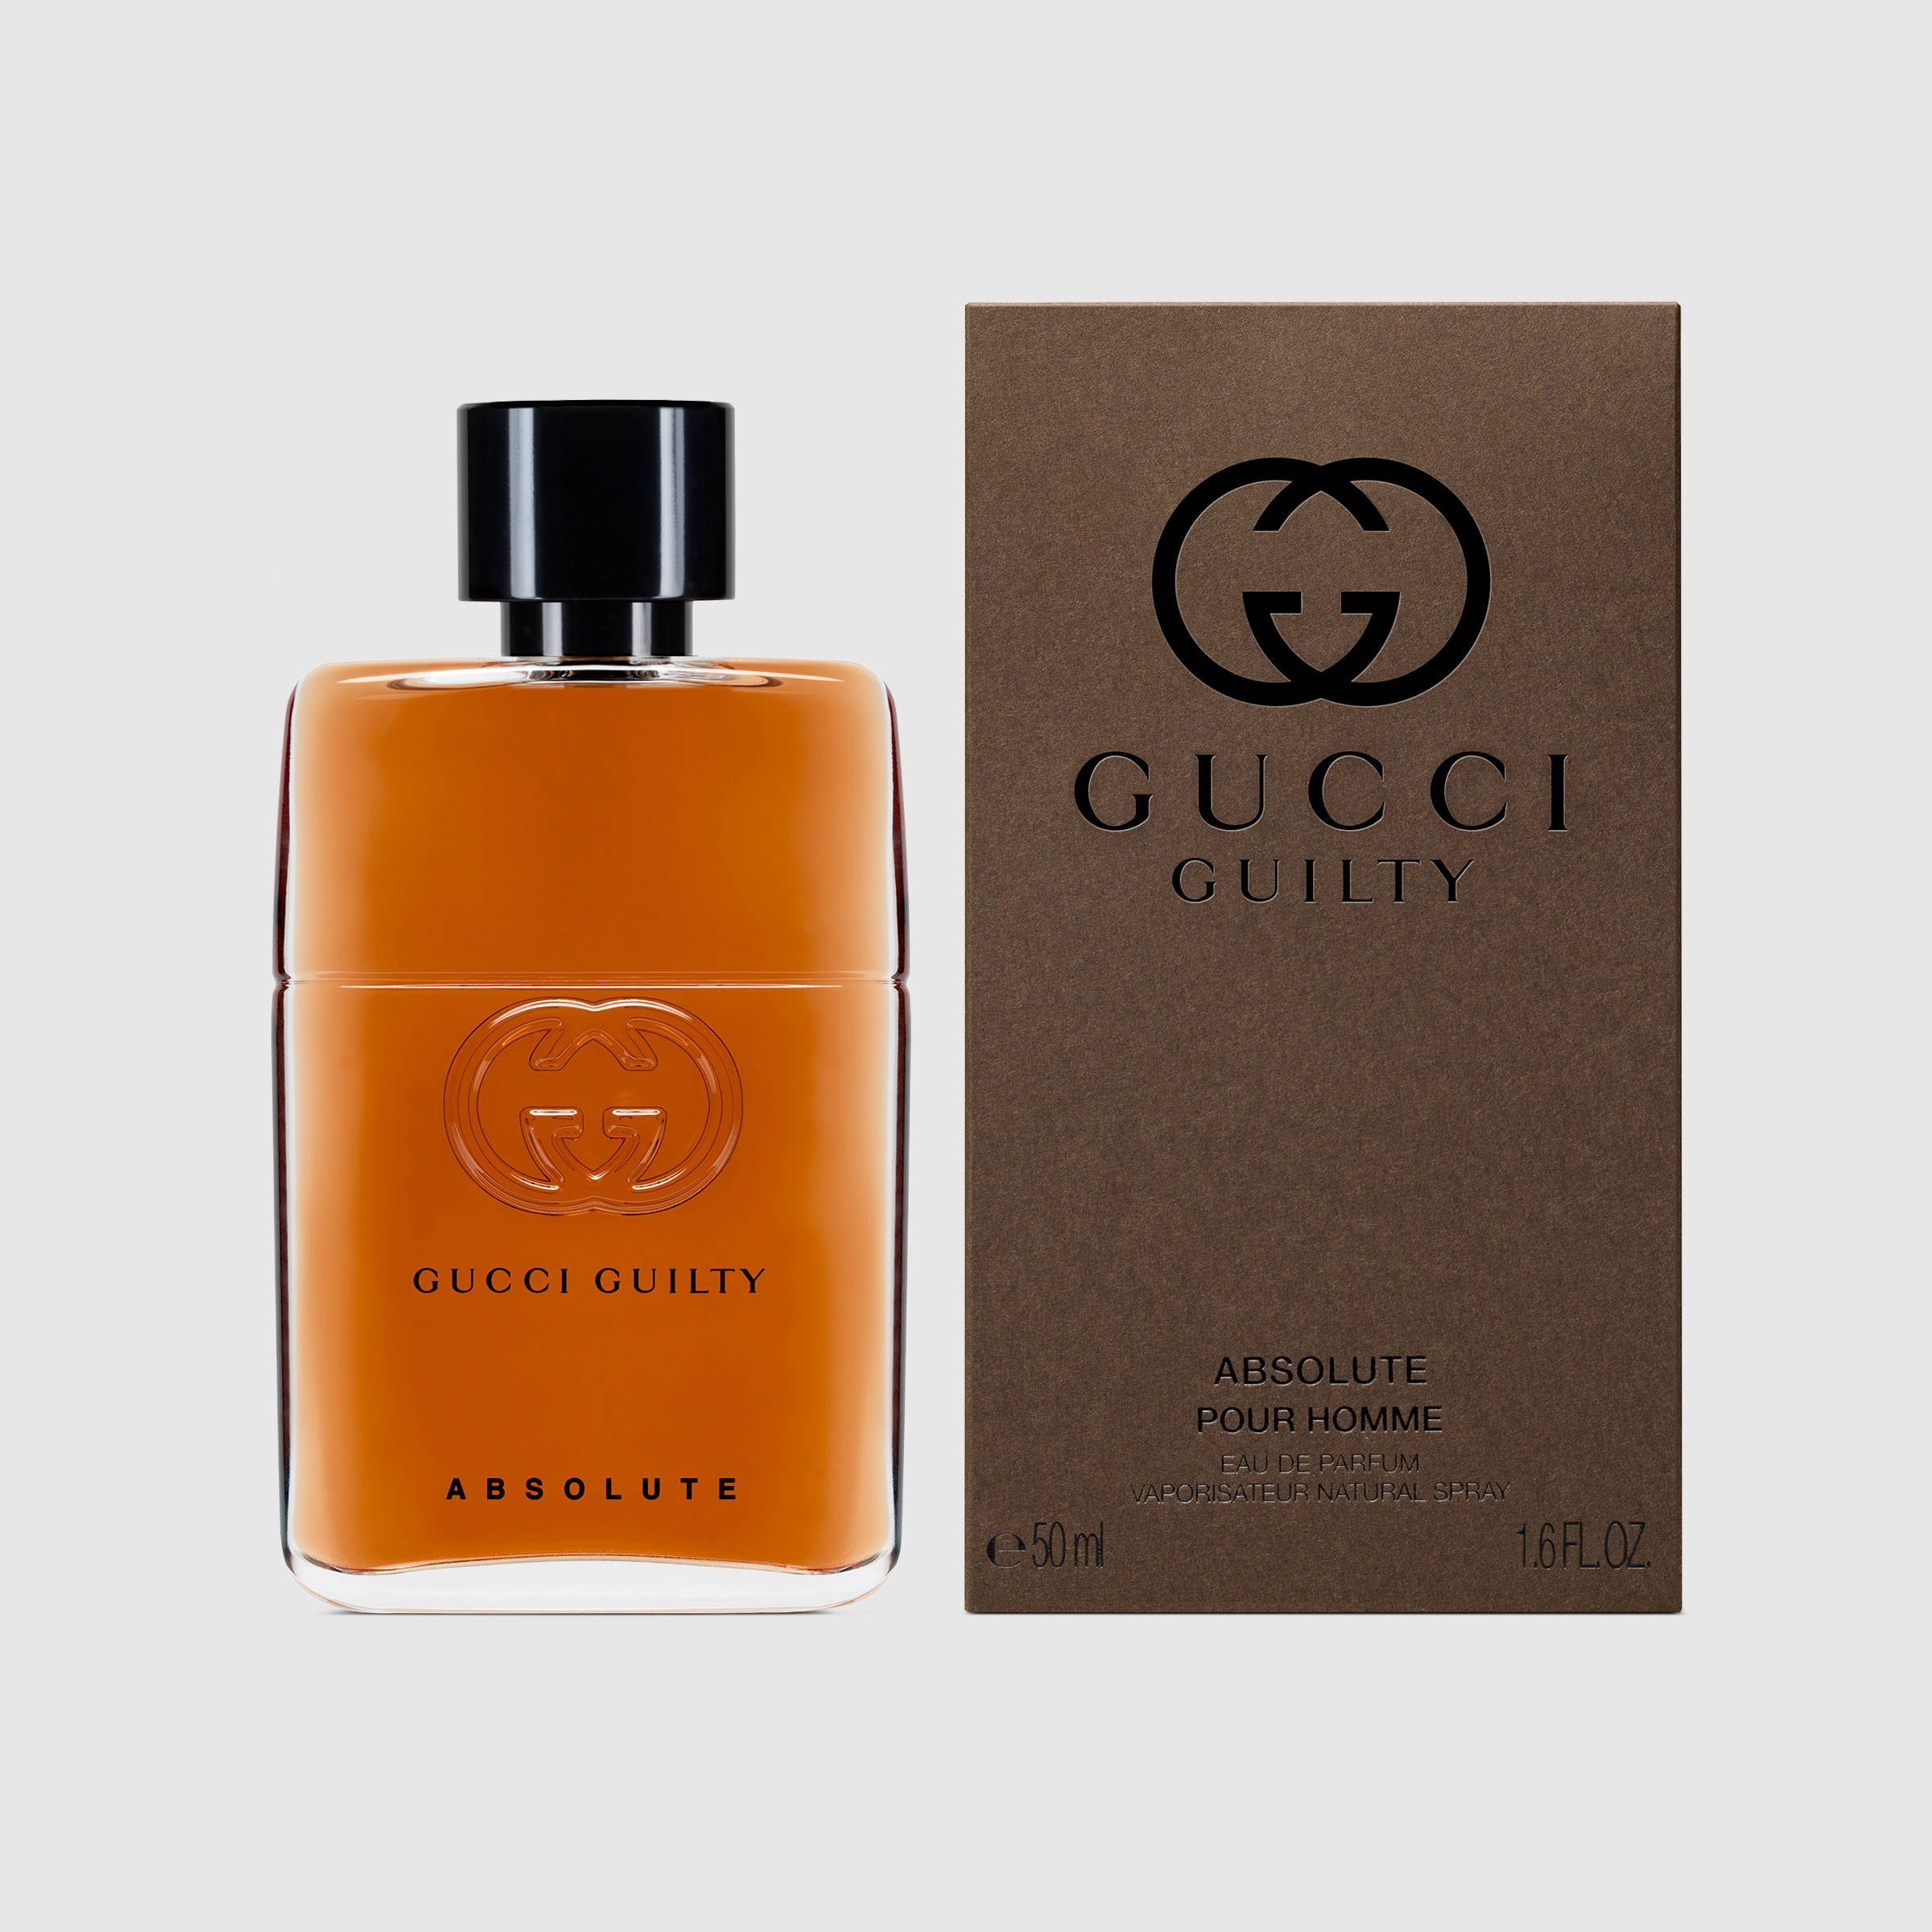 Gucci Guilty Absolute edp M